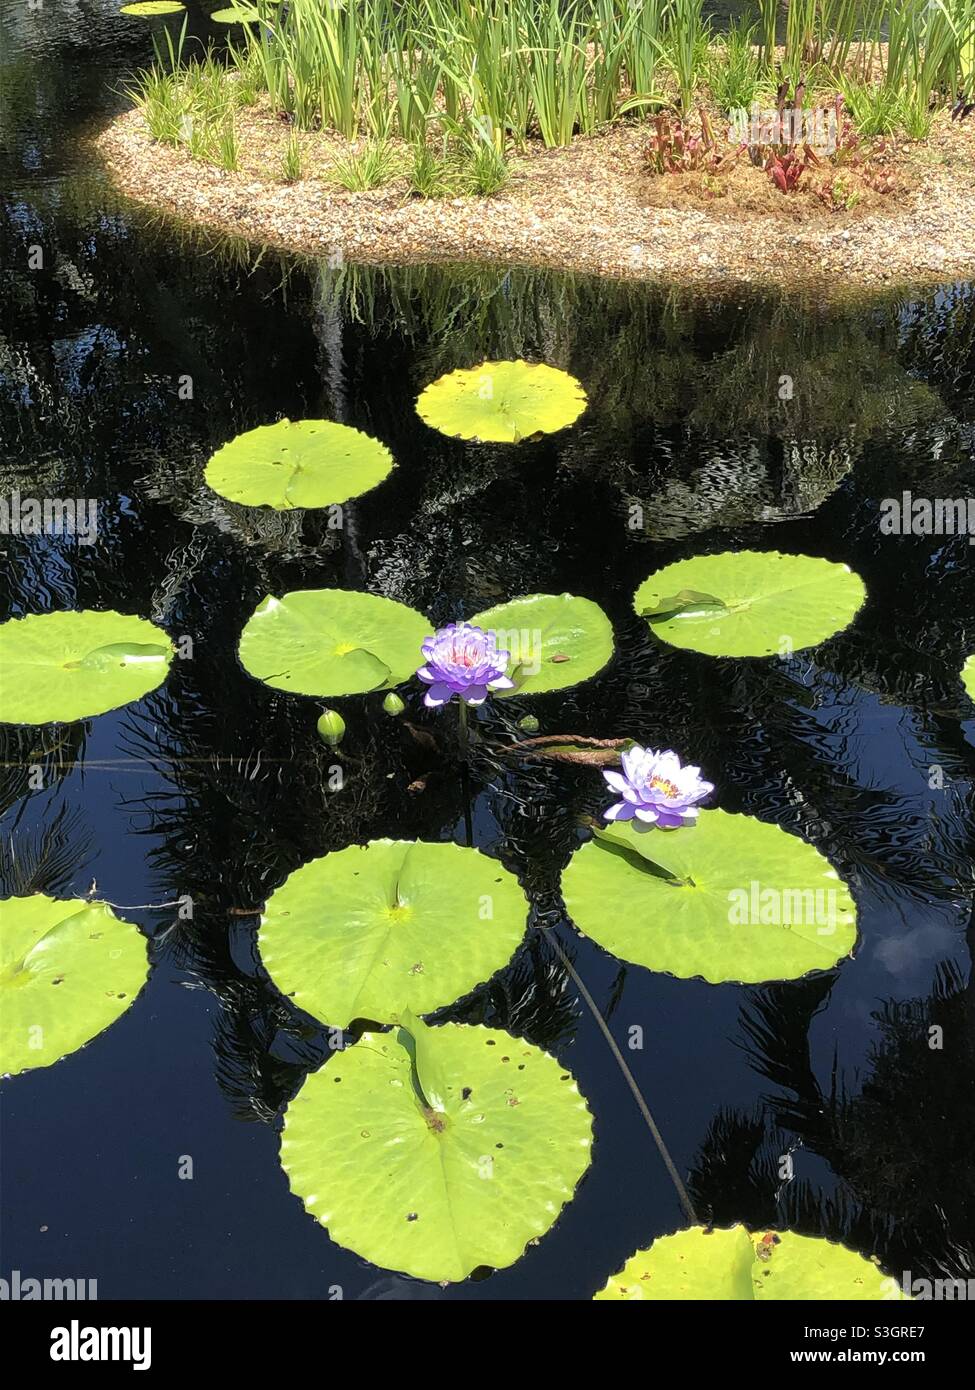 Purple flowers on lily pads Stock Photo